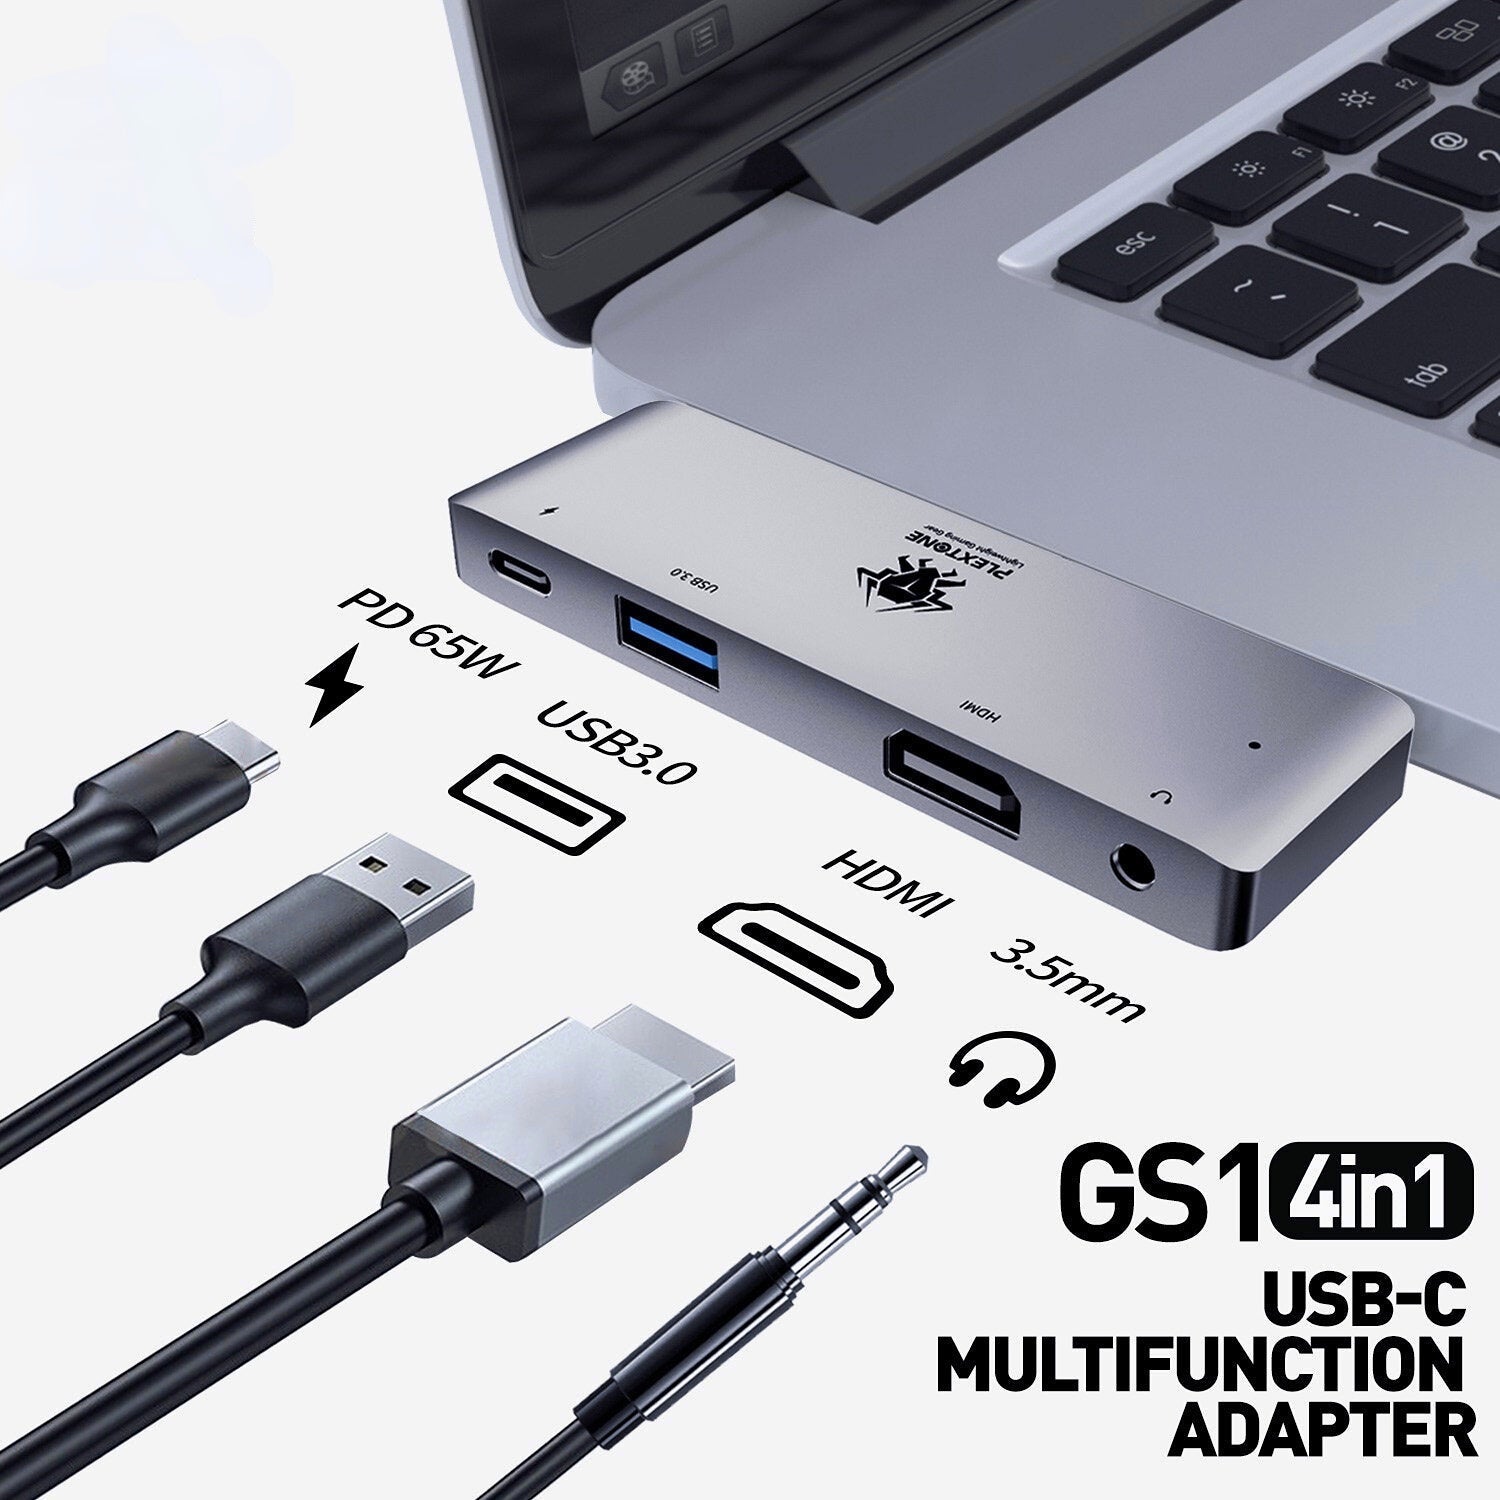 USB C Hub Adapter with 1*HDMI / 1*USB3.0 / 1*PD Charging / 1*3.5mm Audio 4 in 1